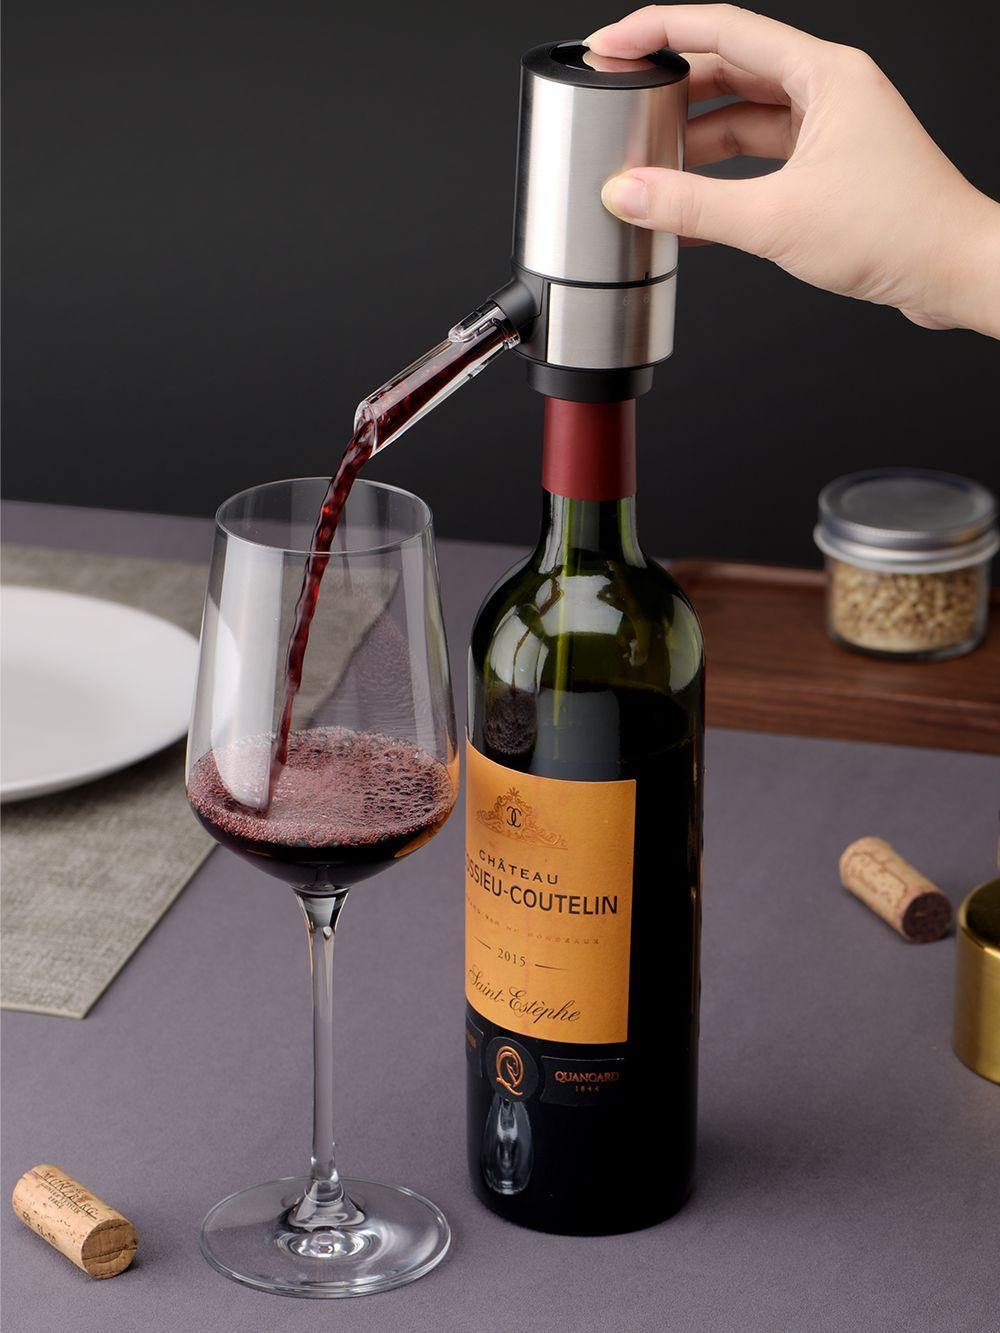 Electric wine aerator and dispenser - Sports, Wine & Gadgets